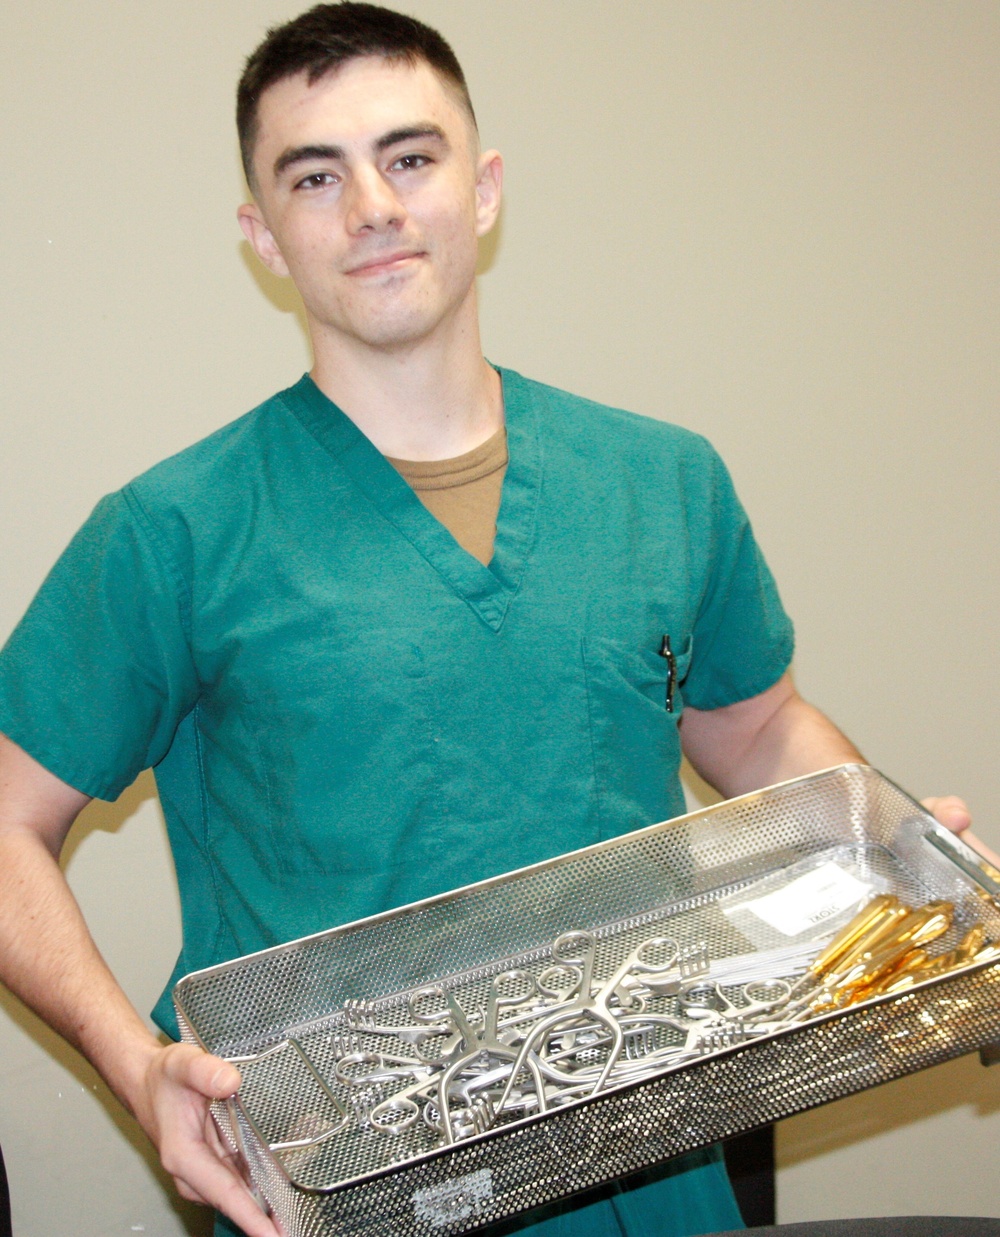 Surgical Technologists: Professionals Behind the Scenes Ensure Patient Health, Safety